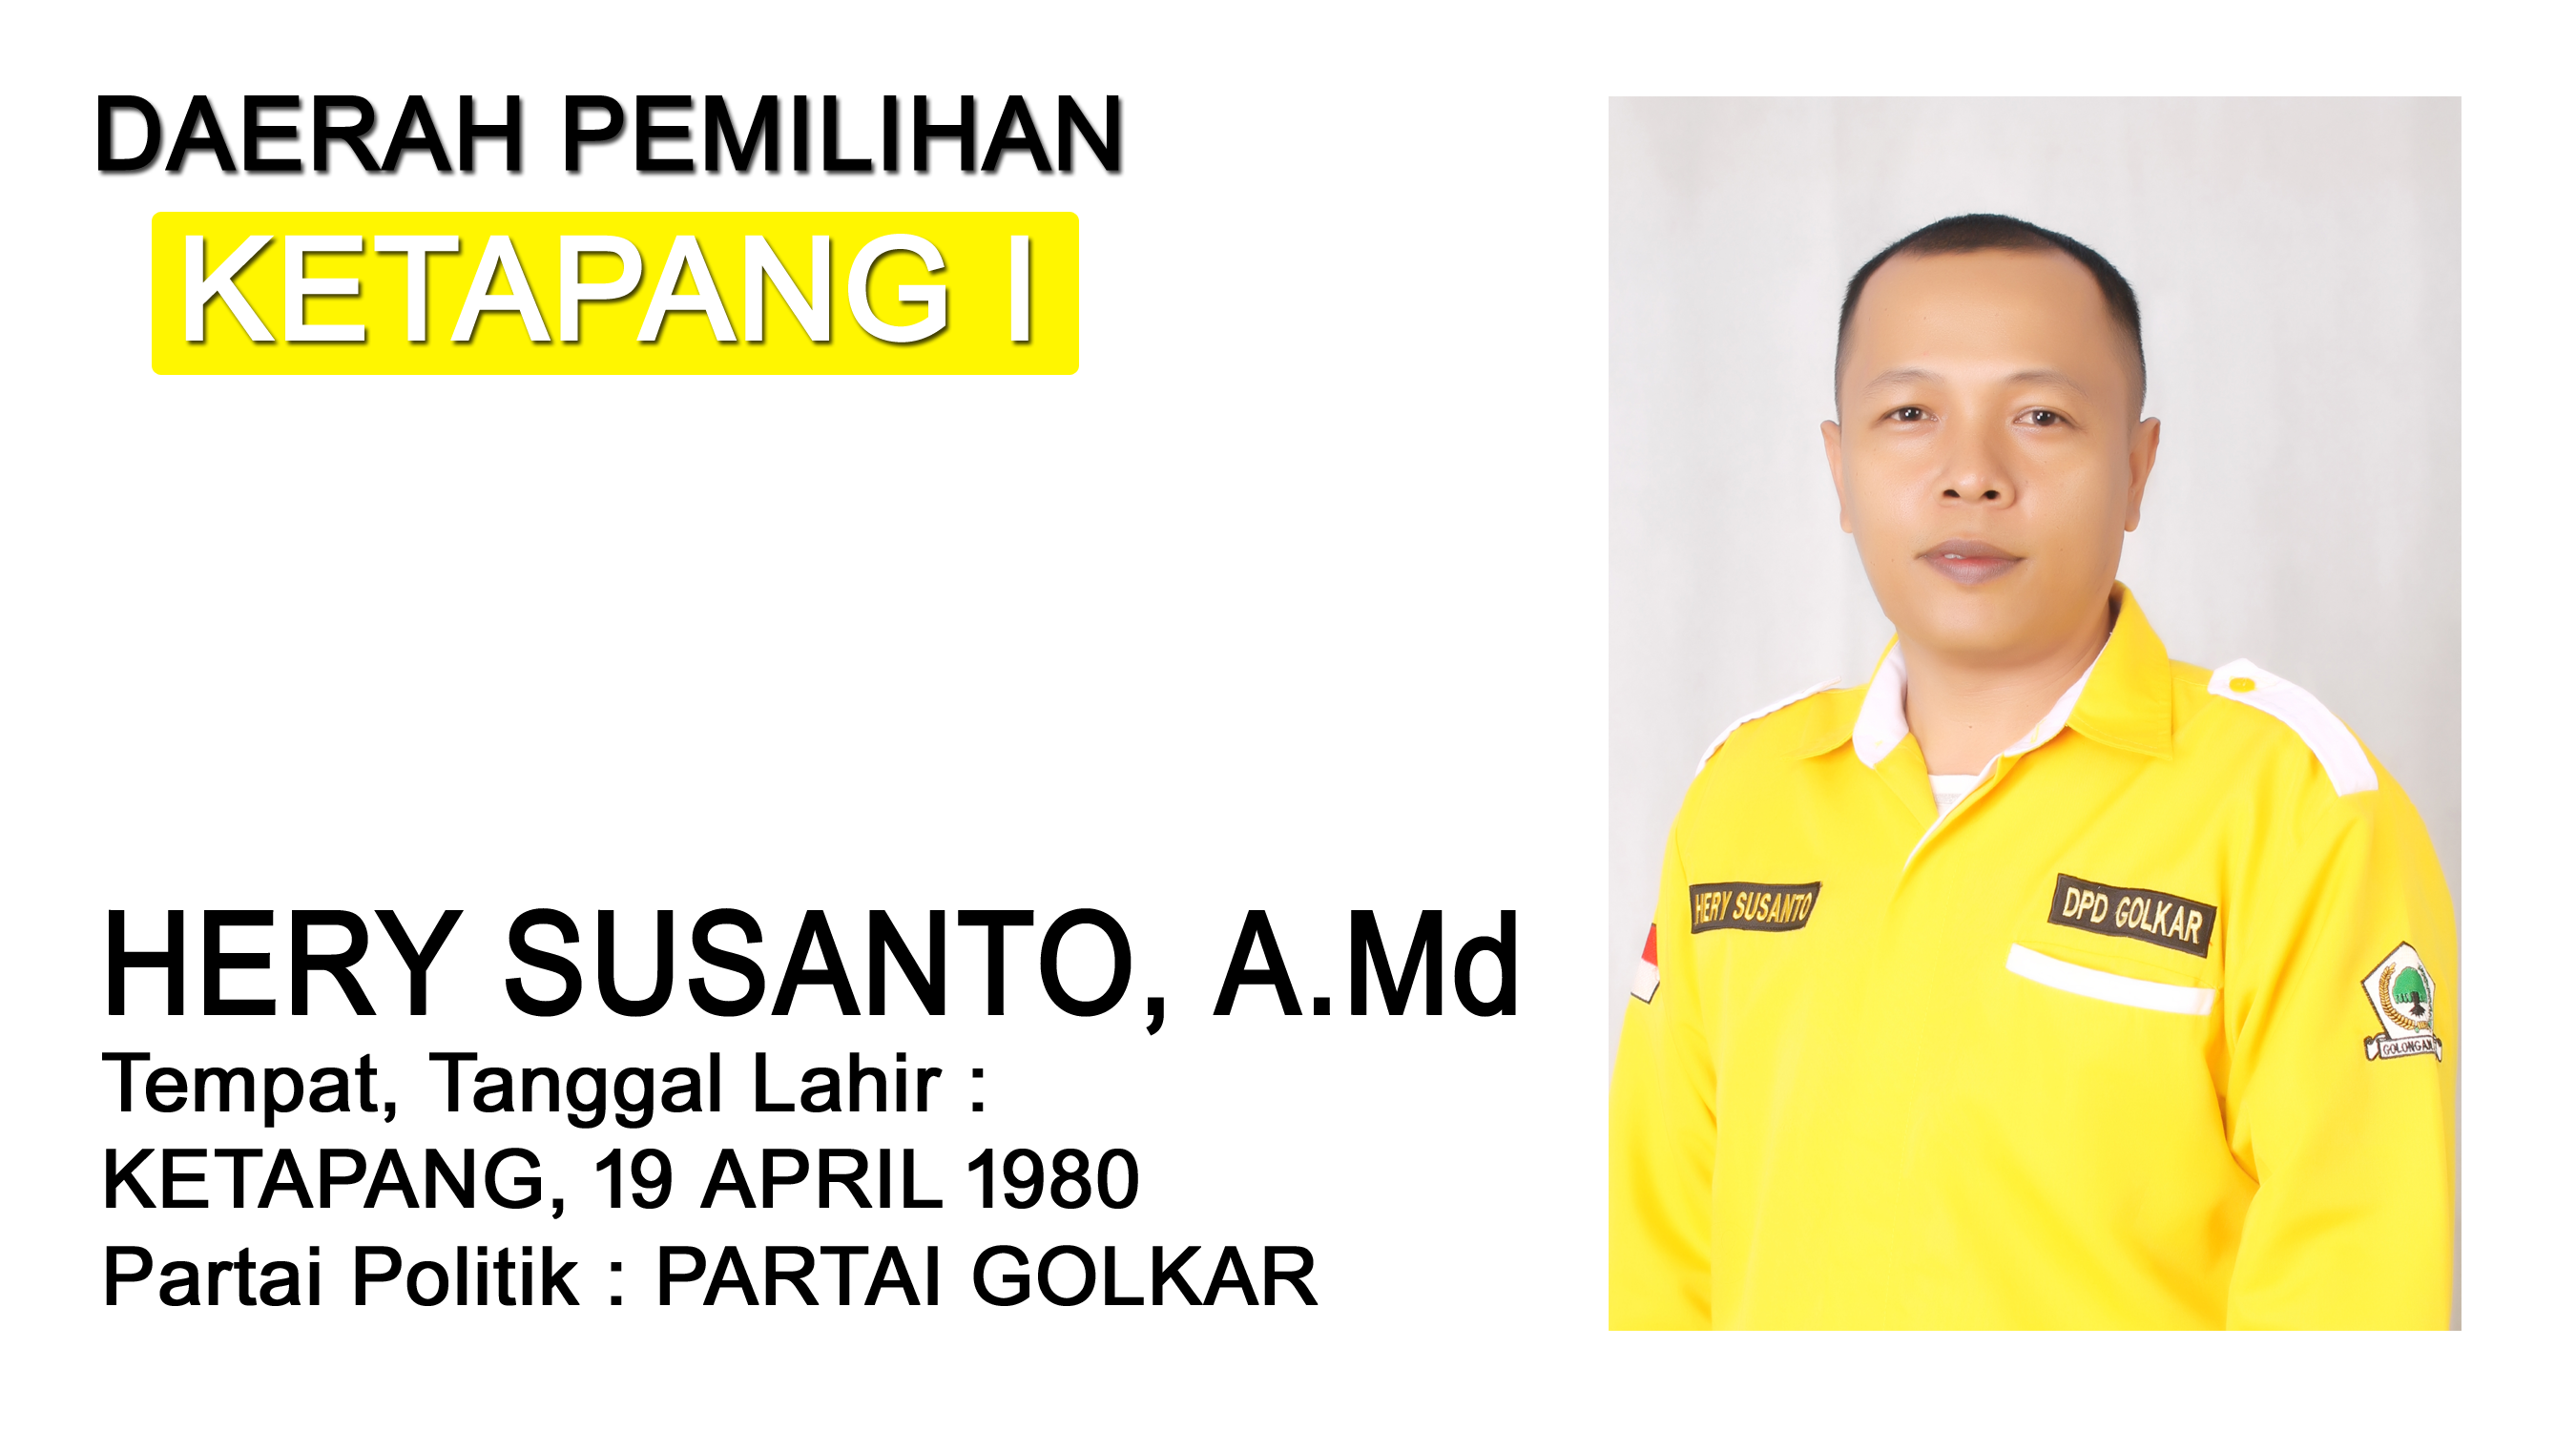 06 HERY SUSANTO, A.Md